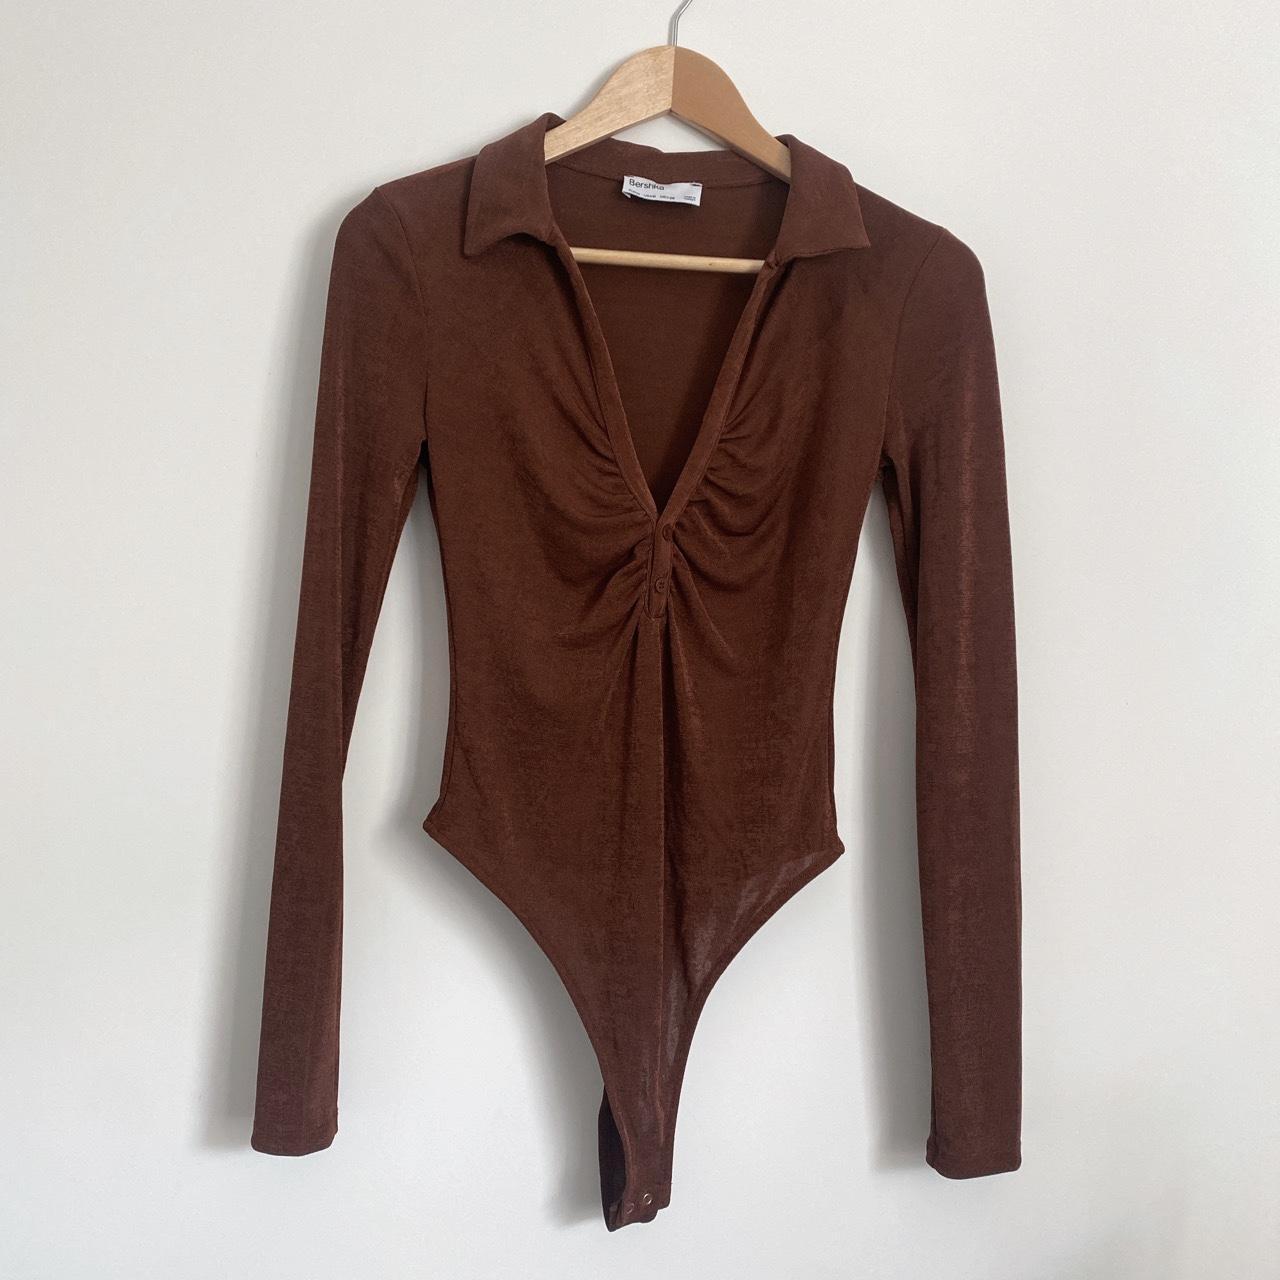 Bershka Ruched Front Polo Bodysuit in Chocolate... - Depop